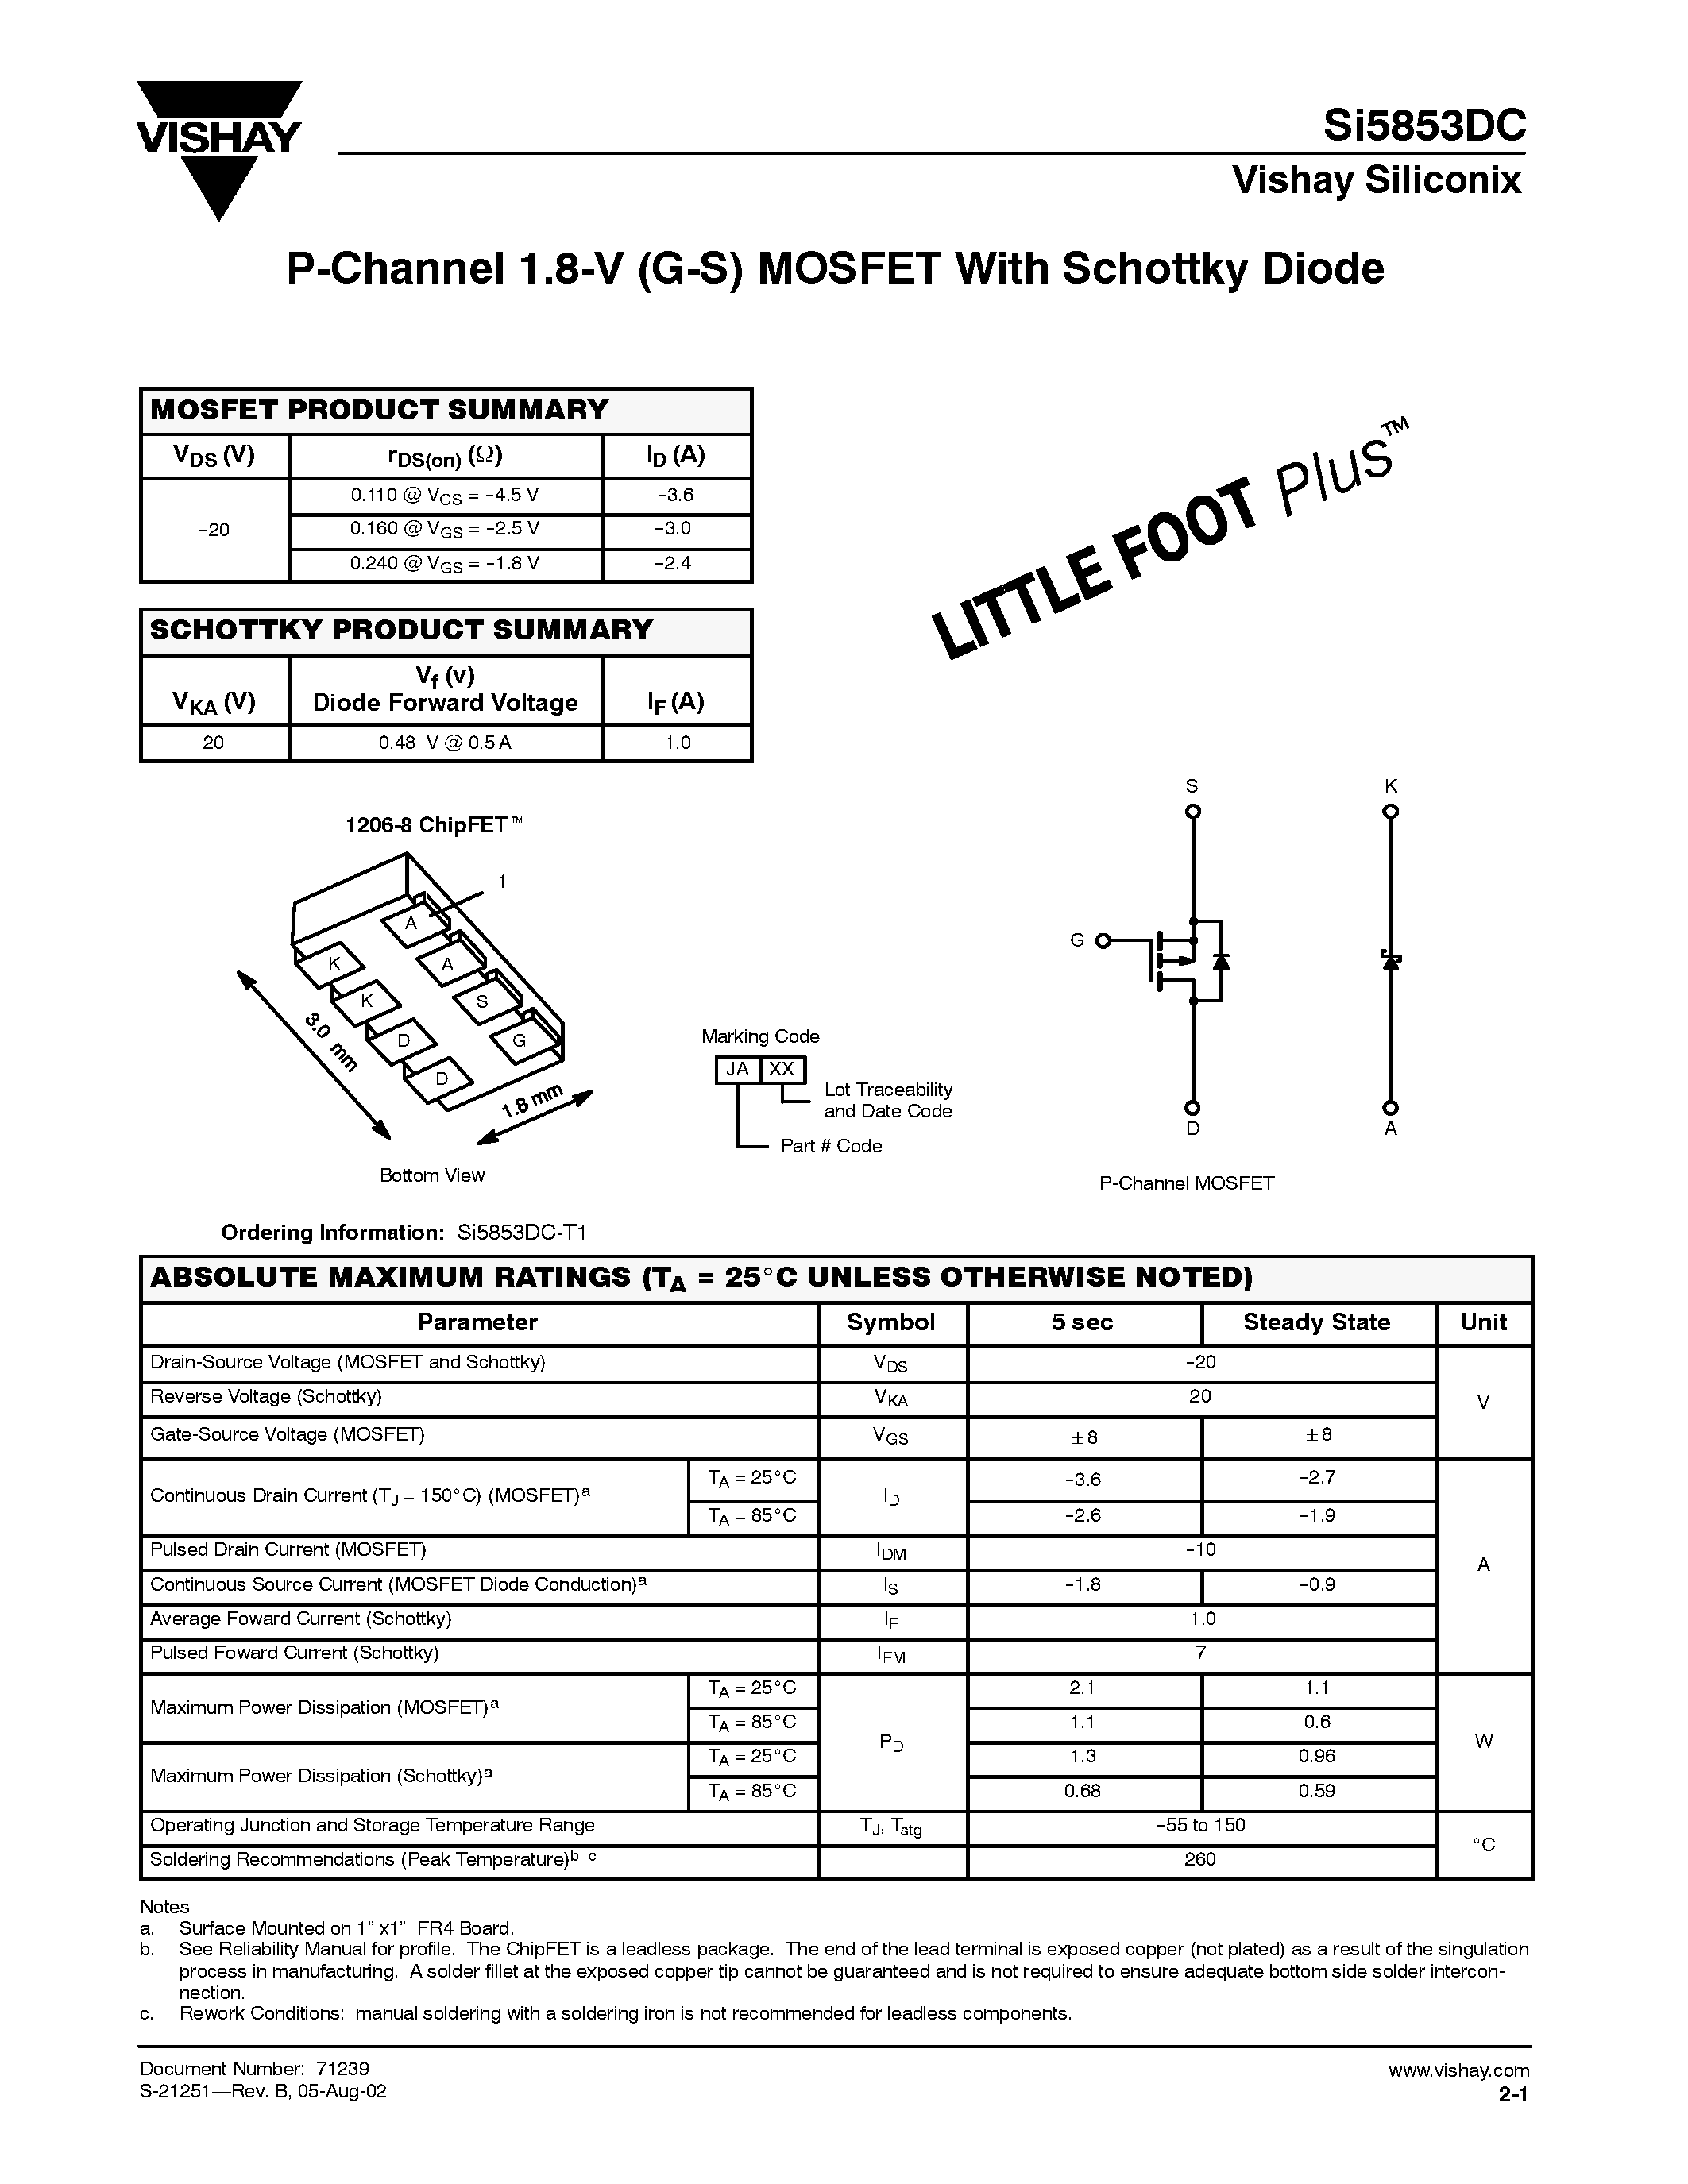 Даташит SI5853DC - P-Channel 1.8-V (G-S) MOSFET With Schottky Diode страница 1